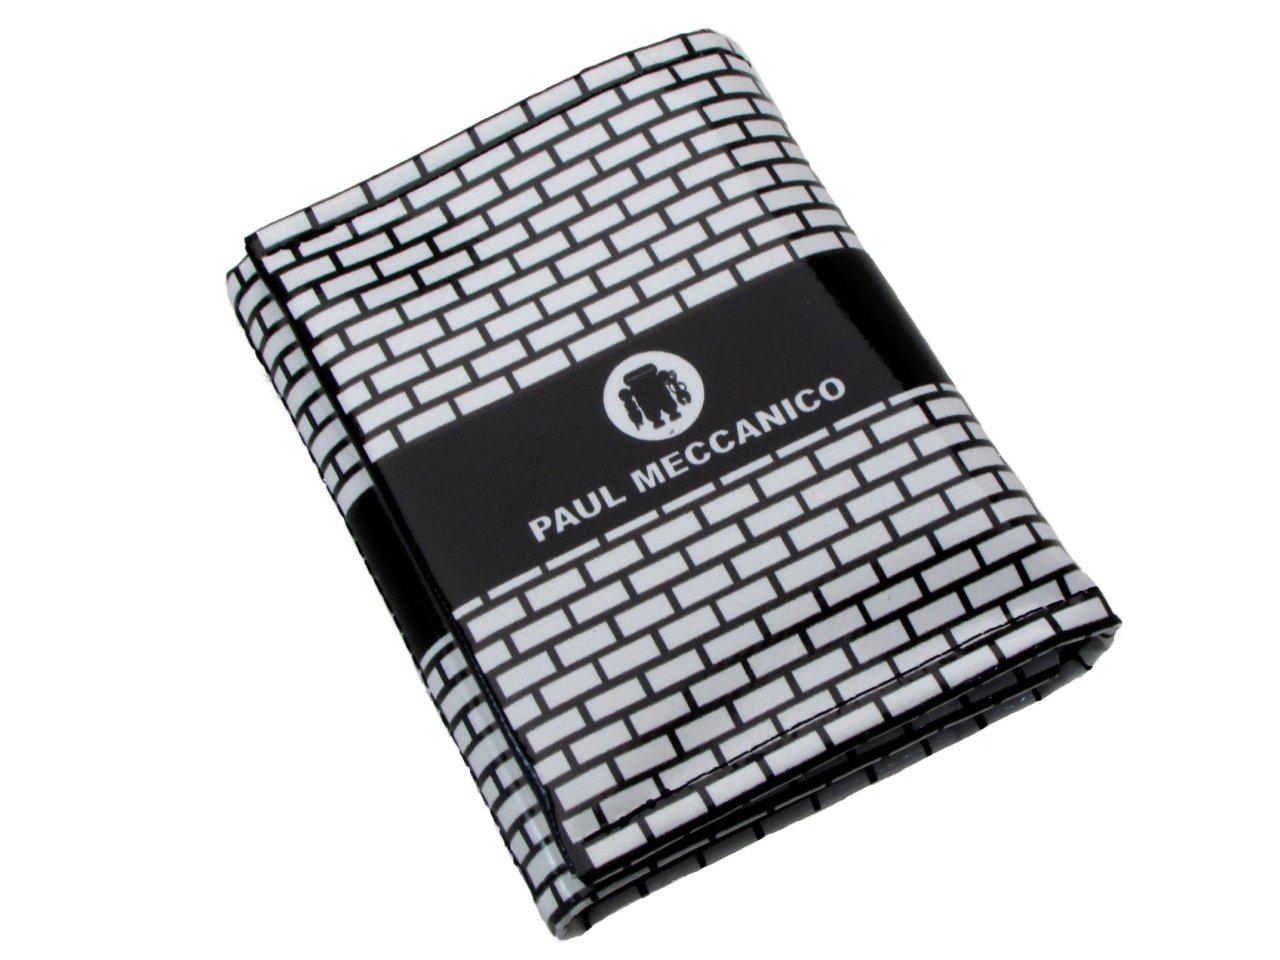 UNISEX WALLET BLACK AND WHITE COLOURS. MODEL TREK MADE OF LORRY TARPAULIN. - Limited Edition Paul Meccanico